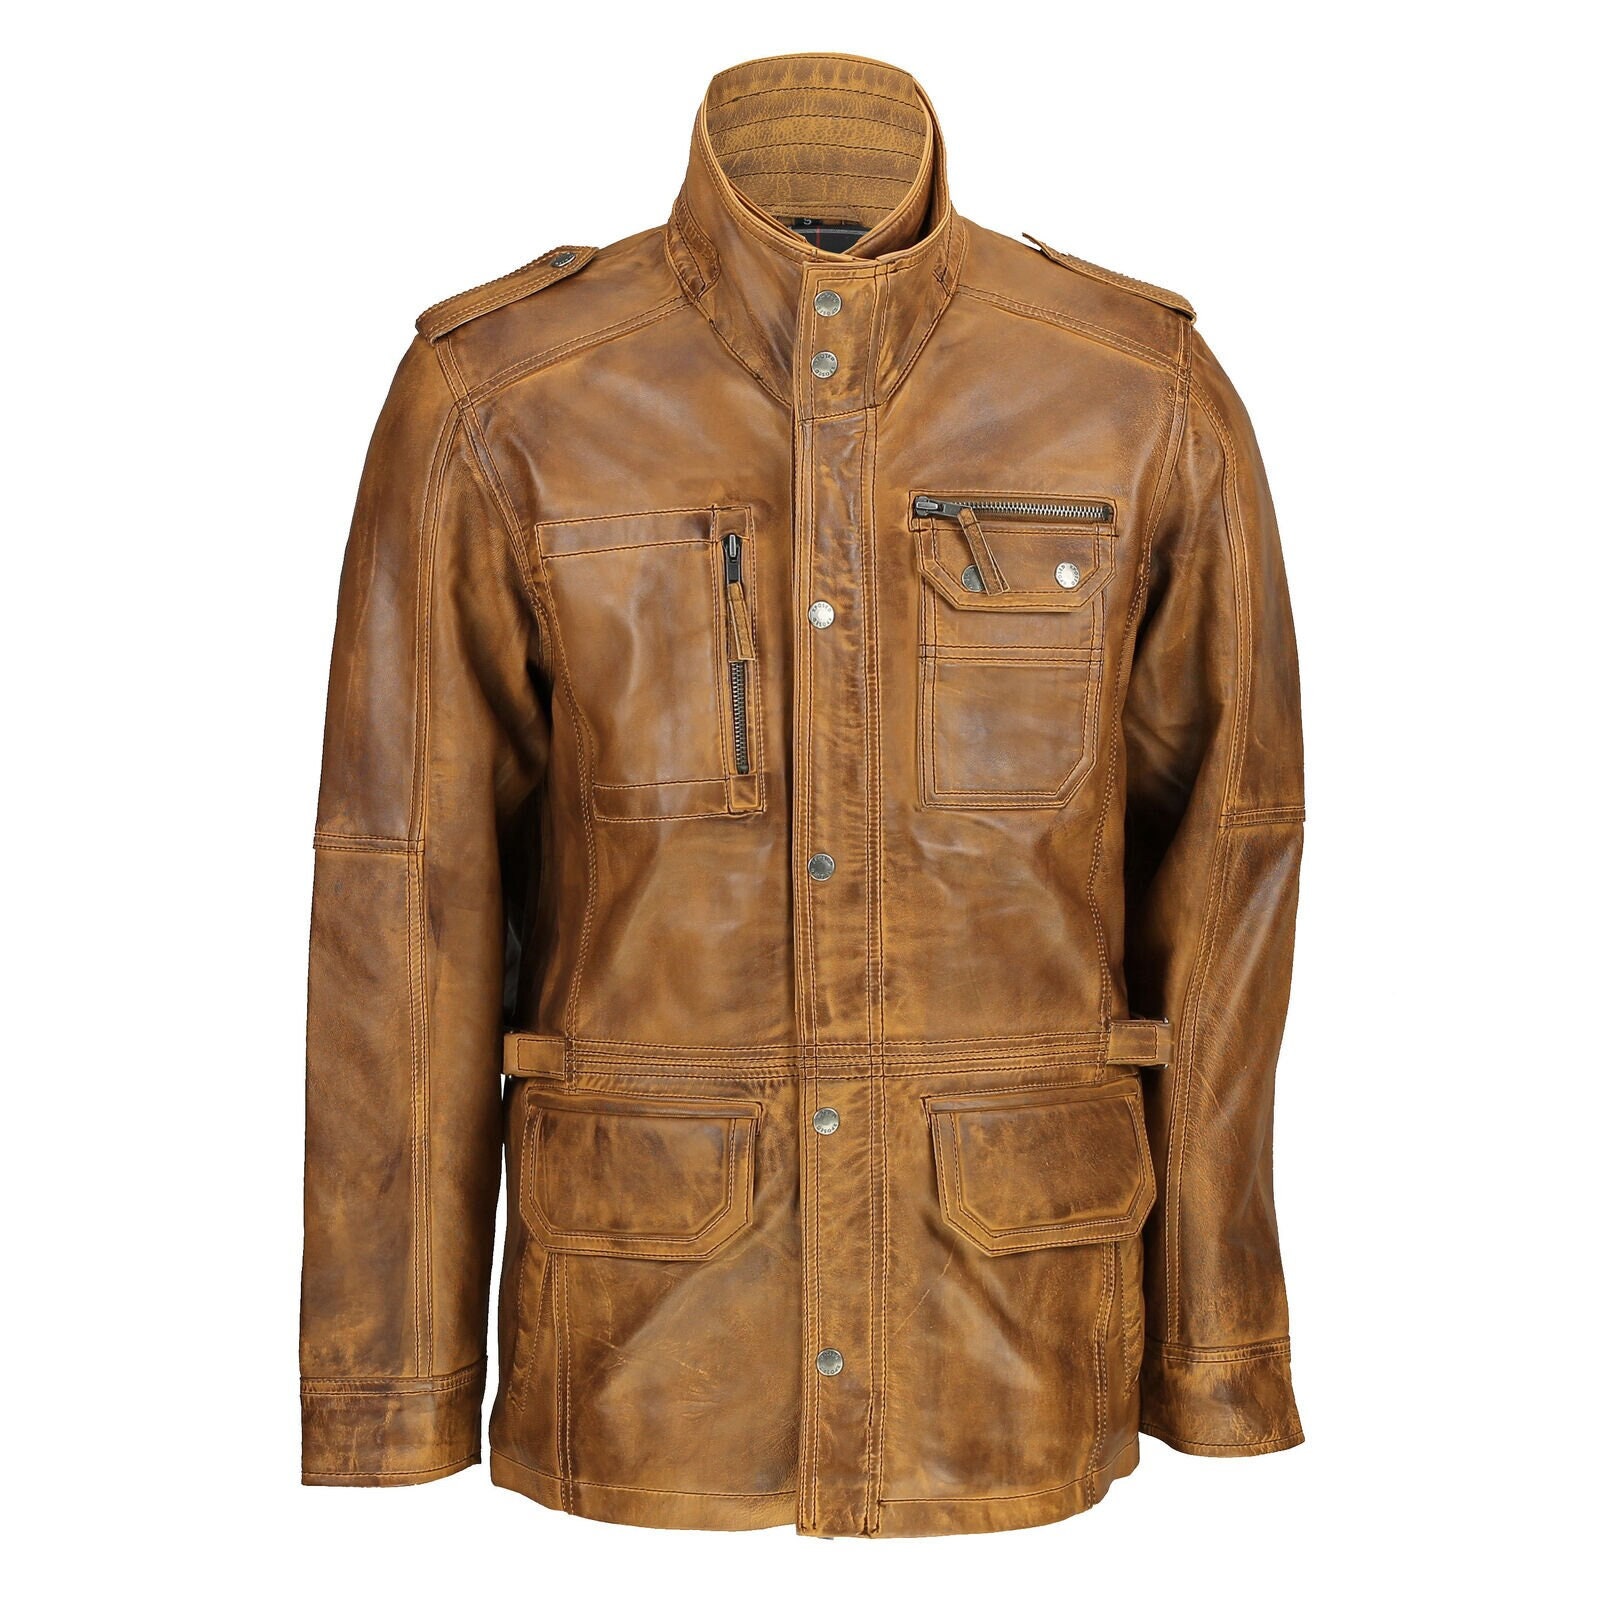 Leather M65 Field Jacket for sale | Only 4 left at -75%